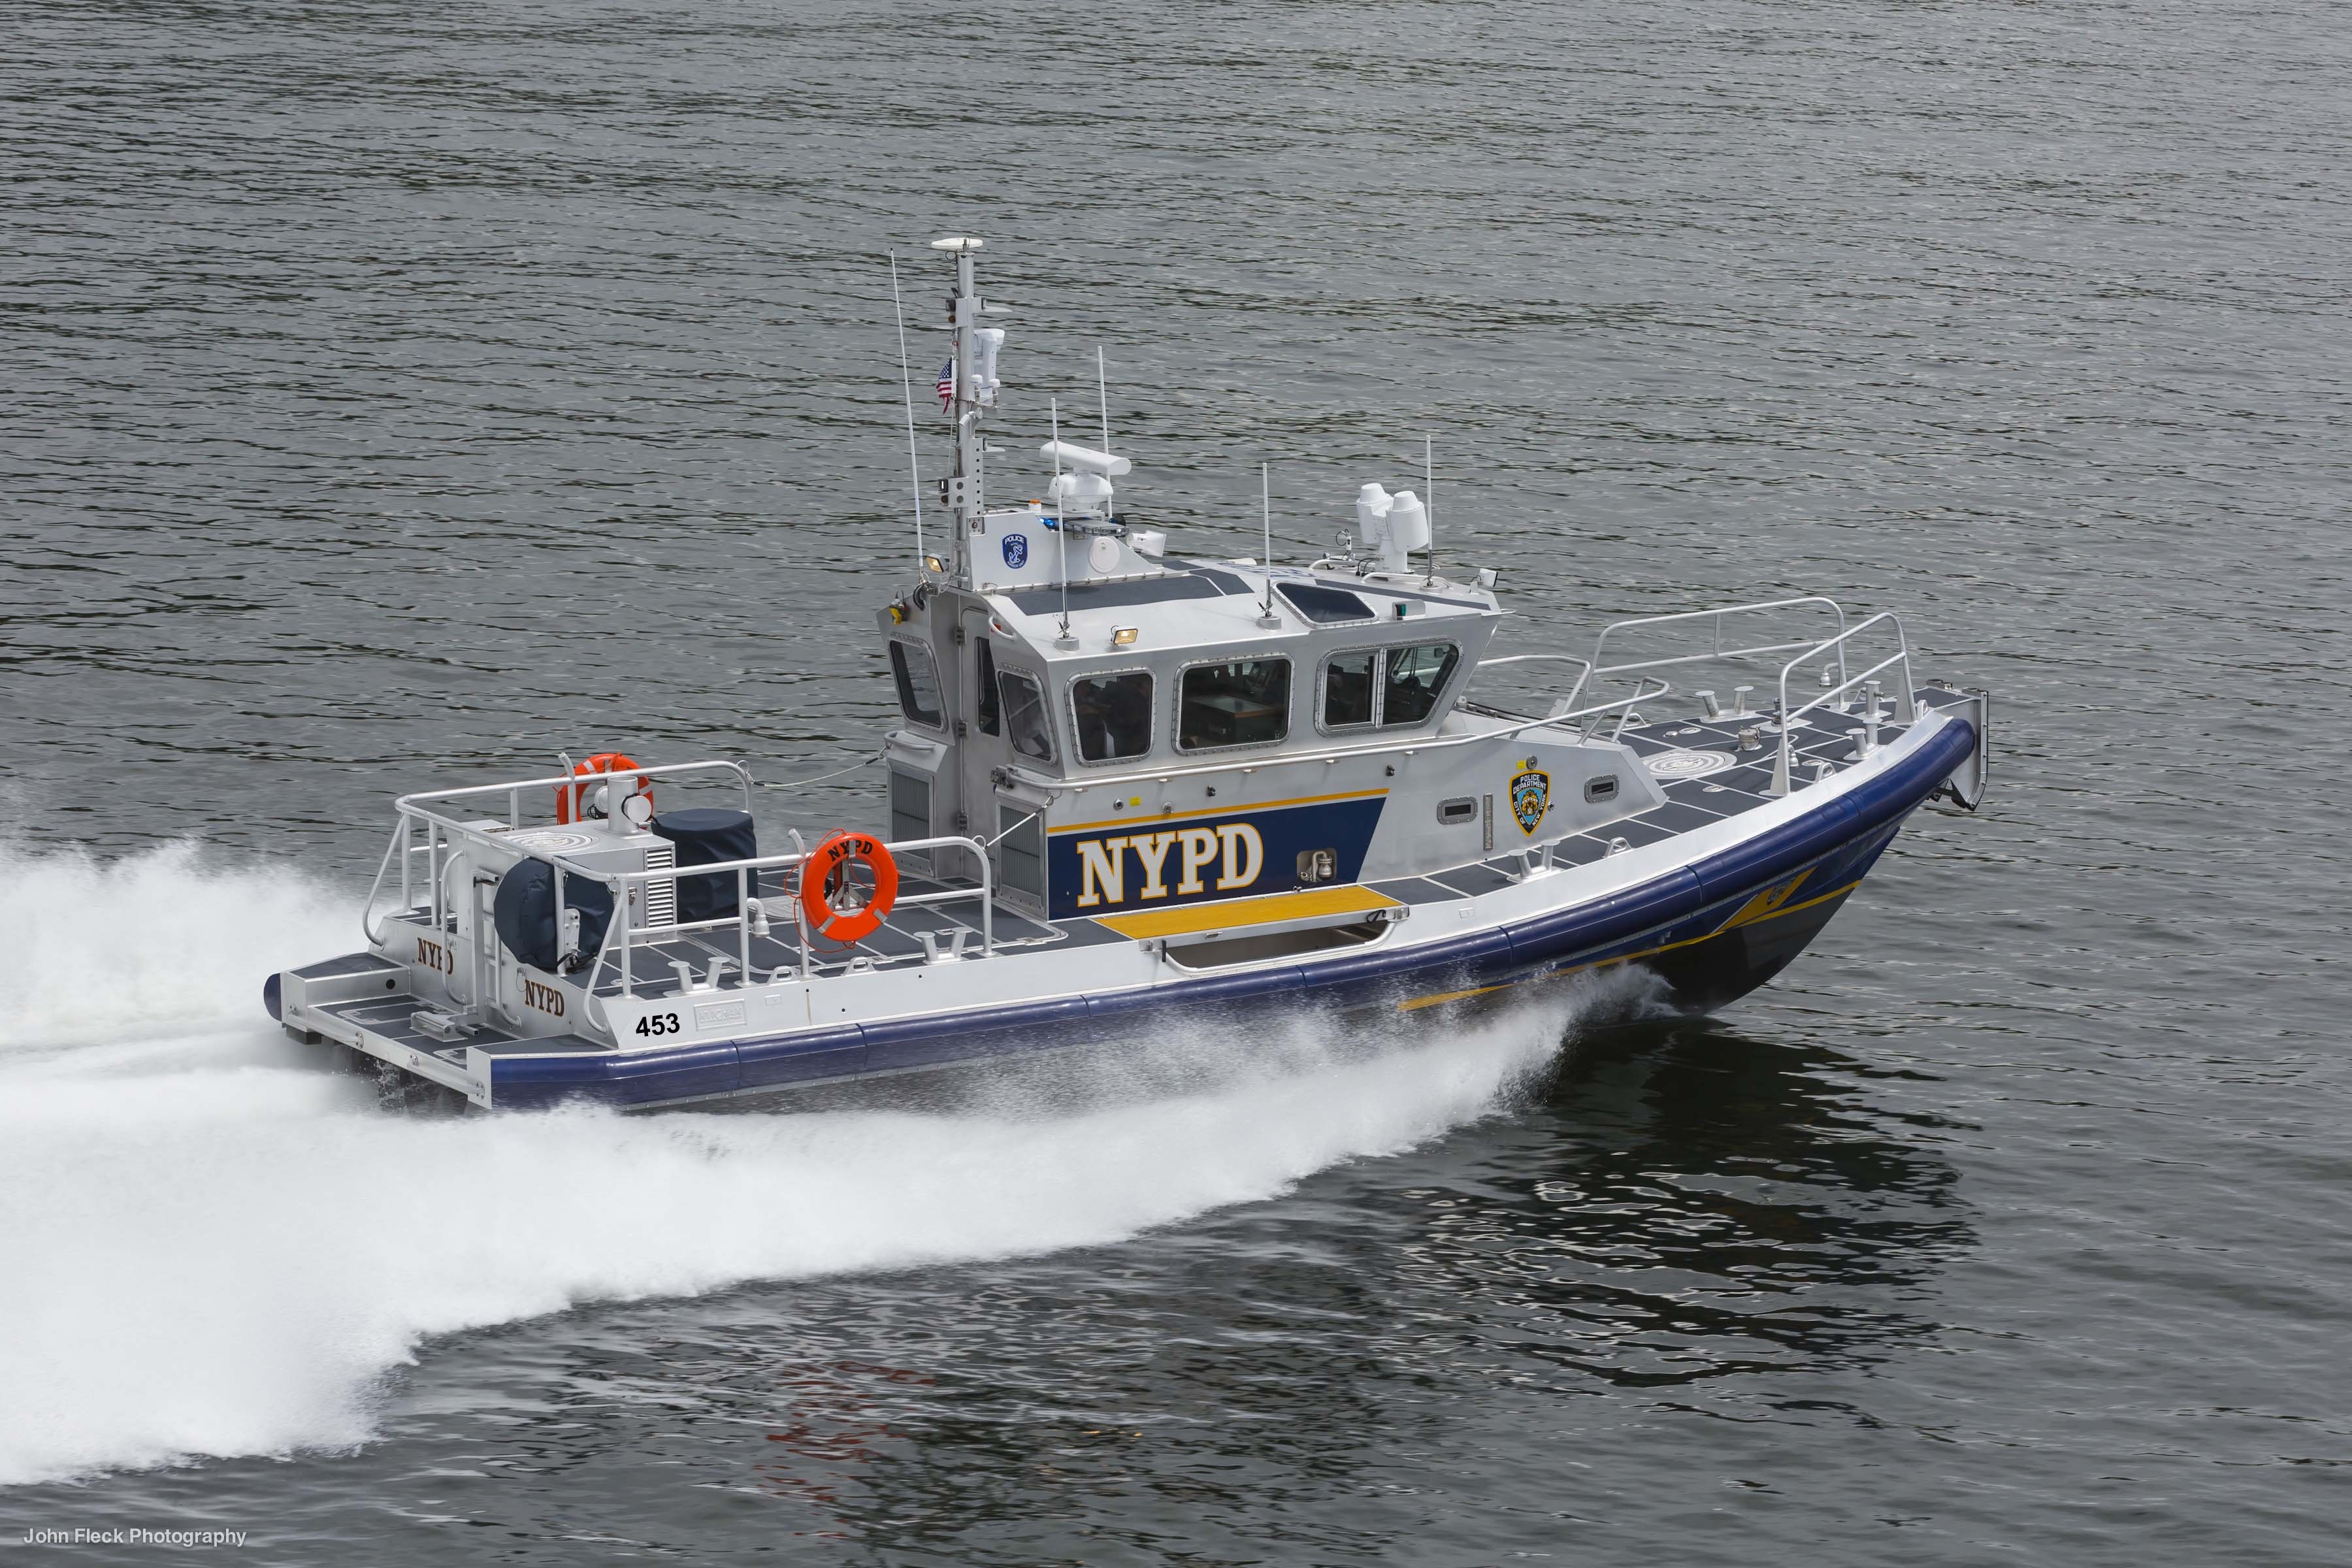 NYPD orders new response boat - Baird Maritime